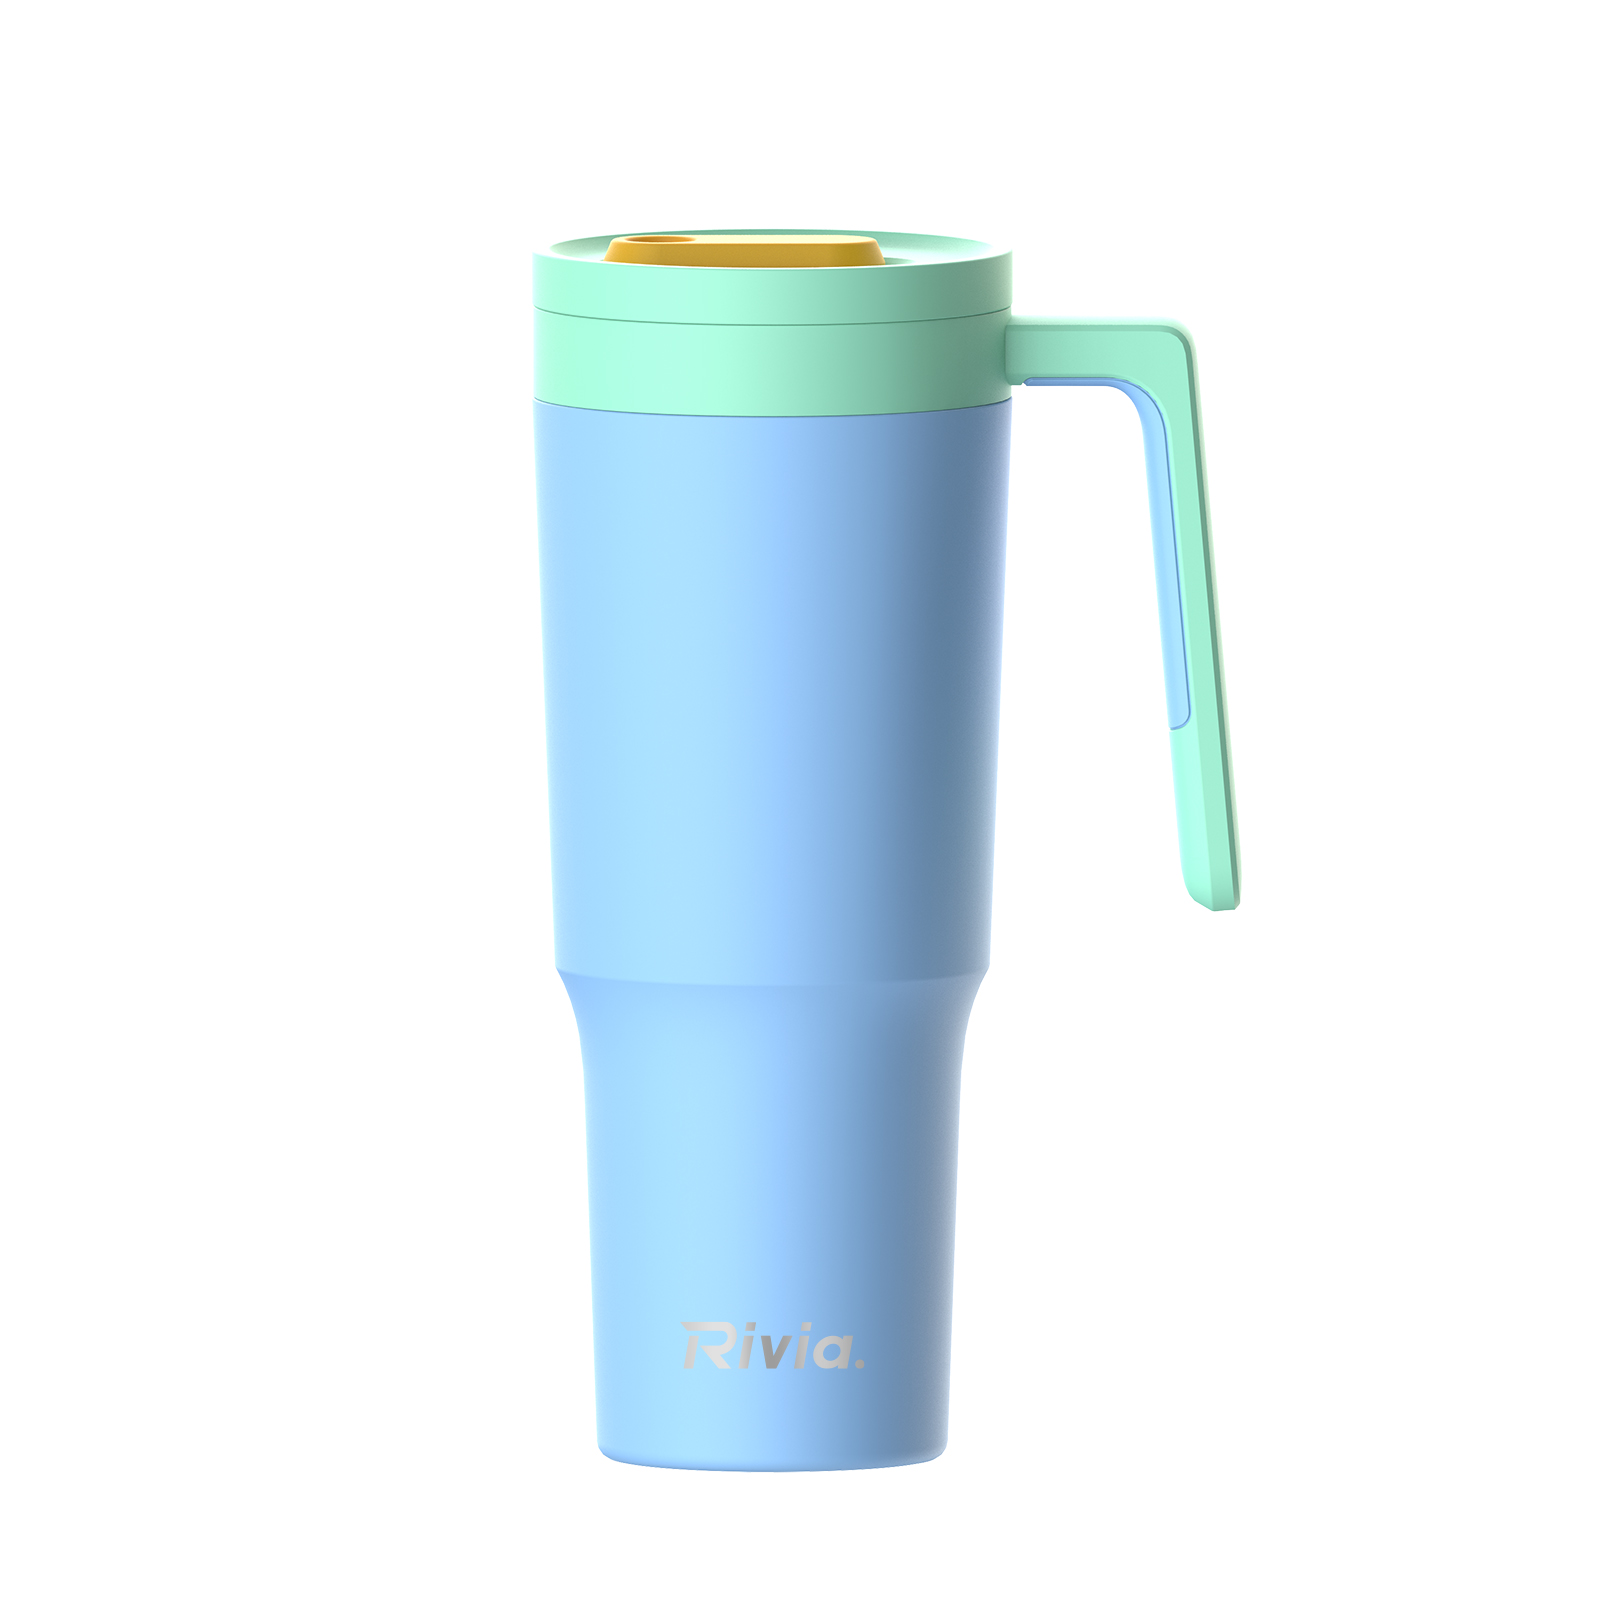 40oz New Design Leakproof Tumbler With Handle, Double Wall Insulated Tumbler, Keep Hot and Cold